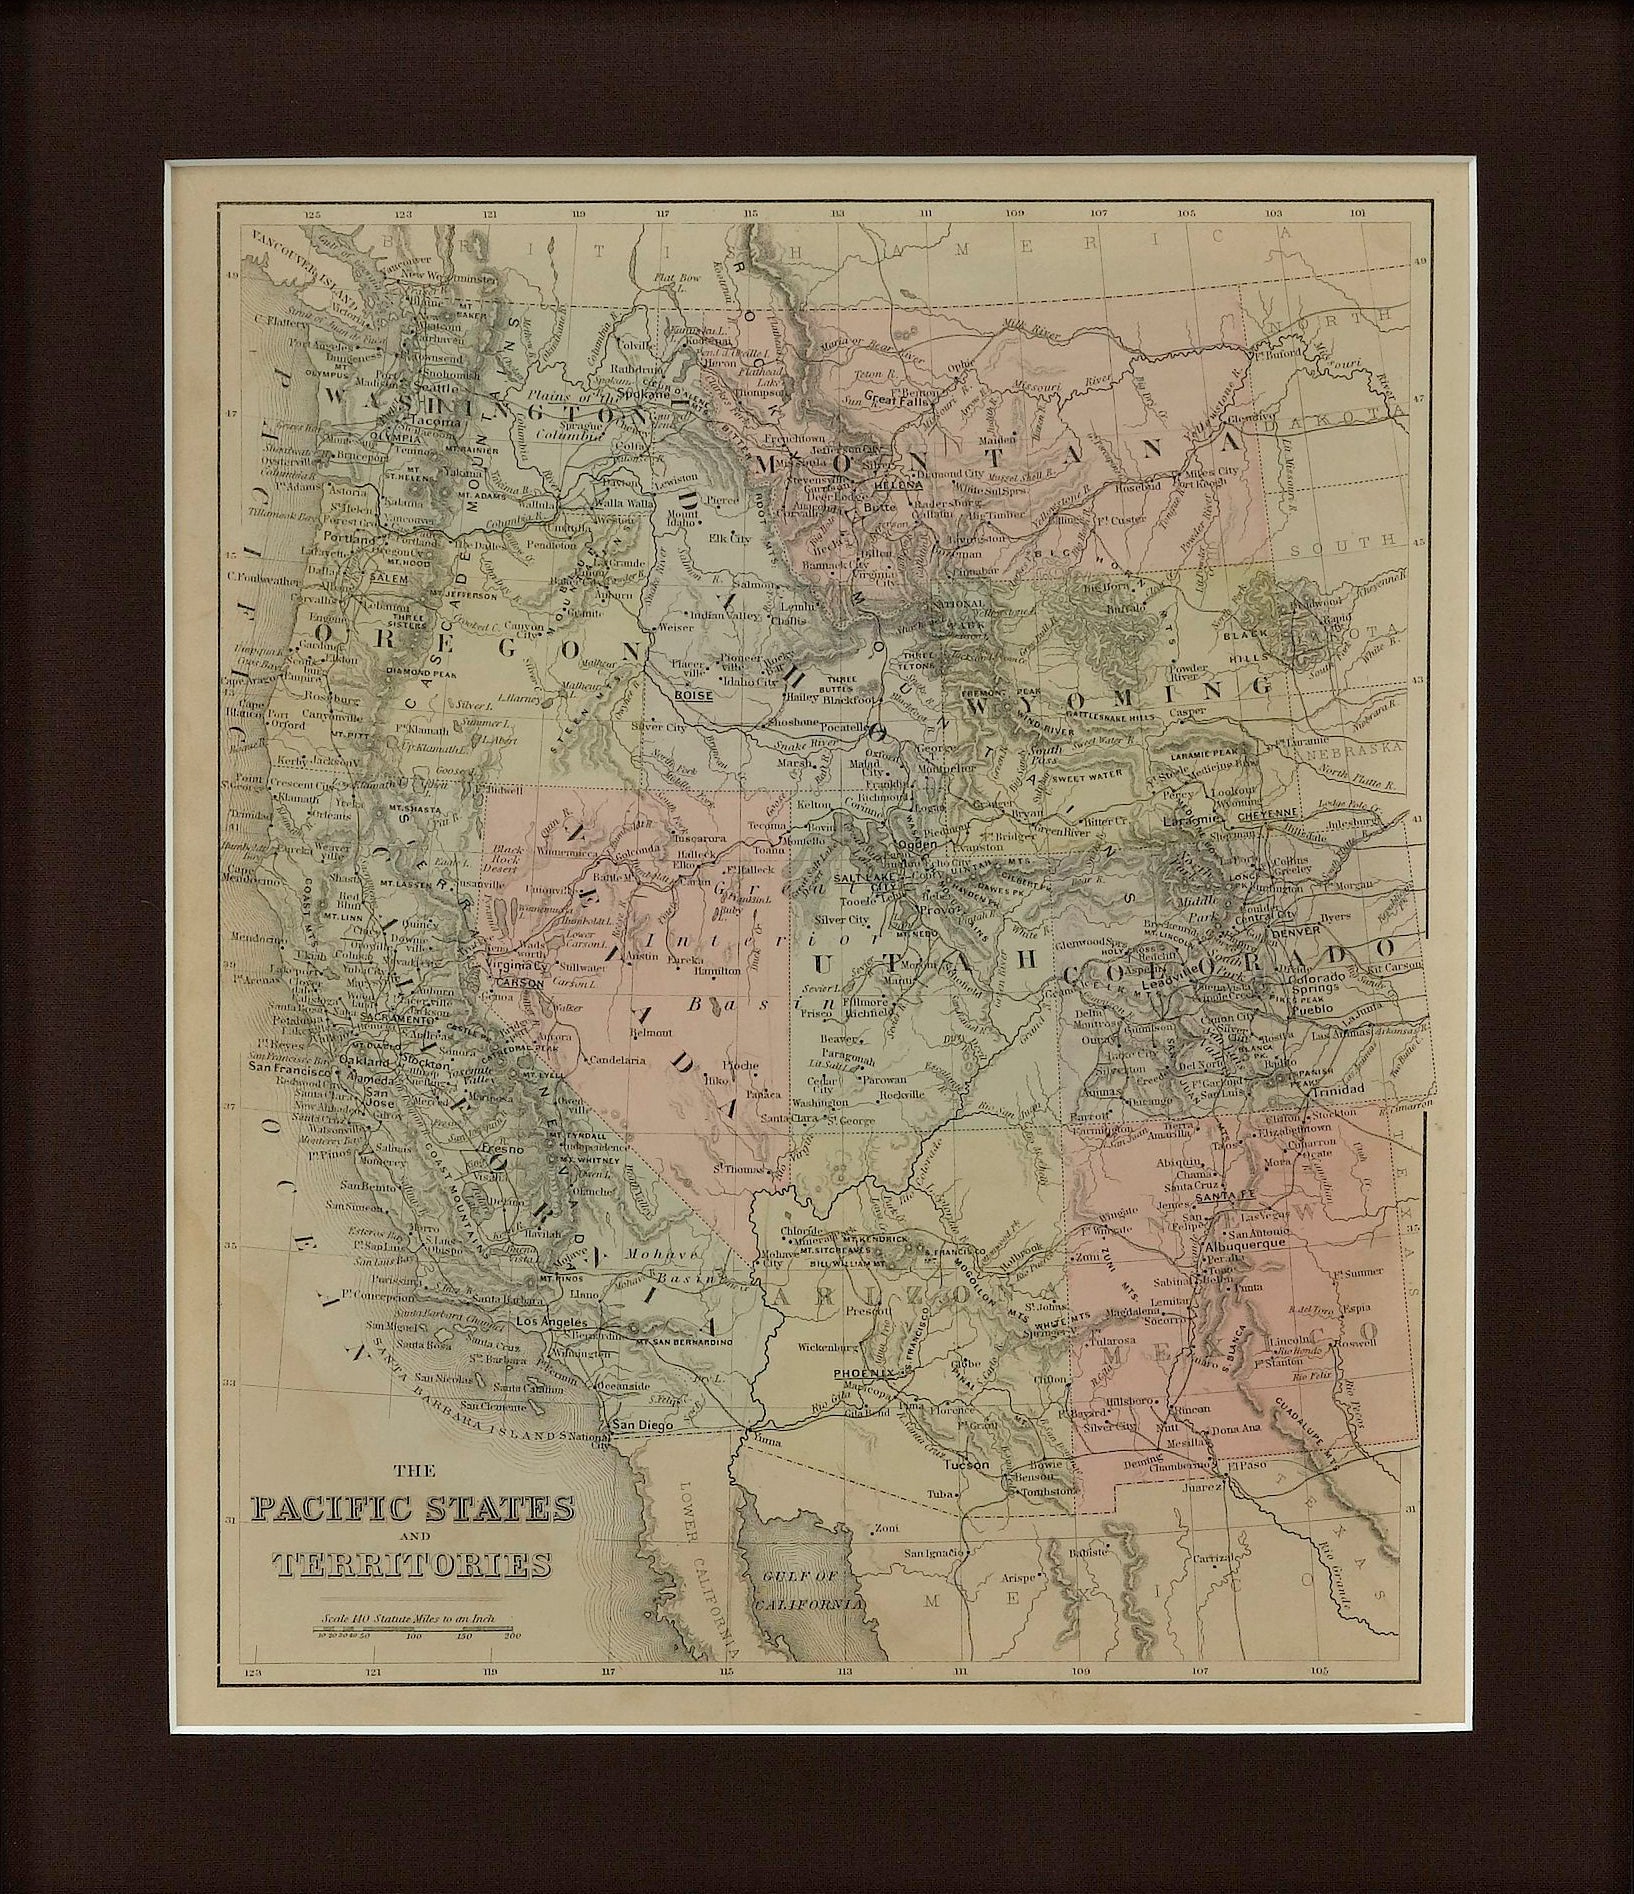 1889 "The Pacific States and Territories" - The Great Republic